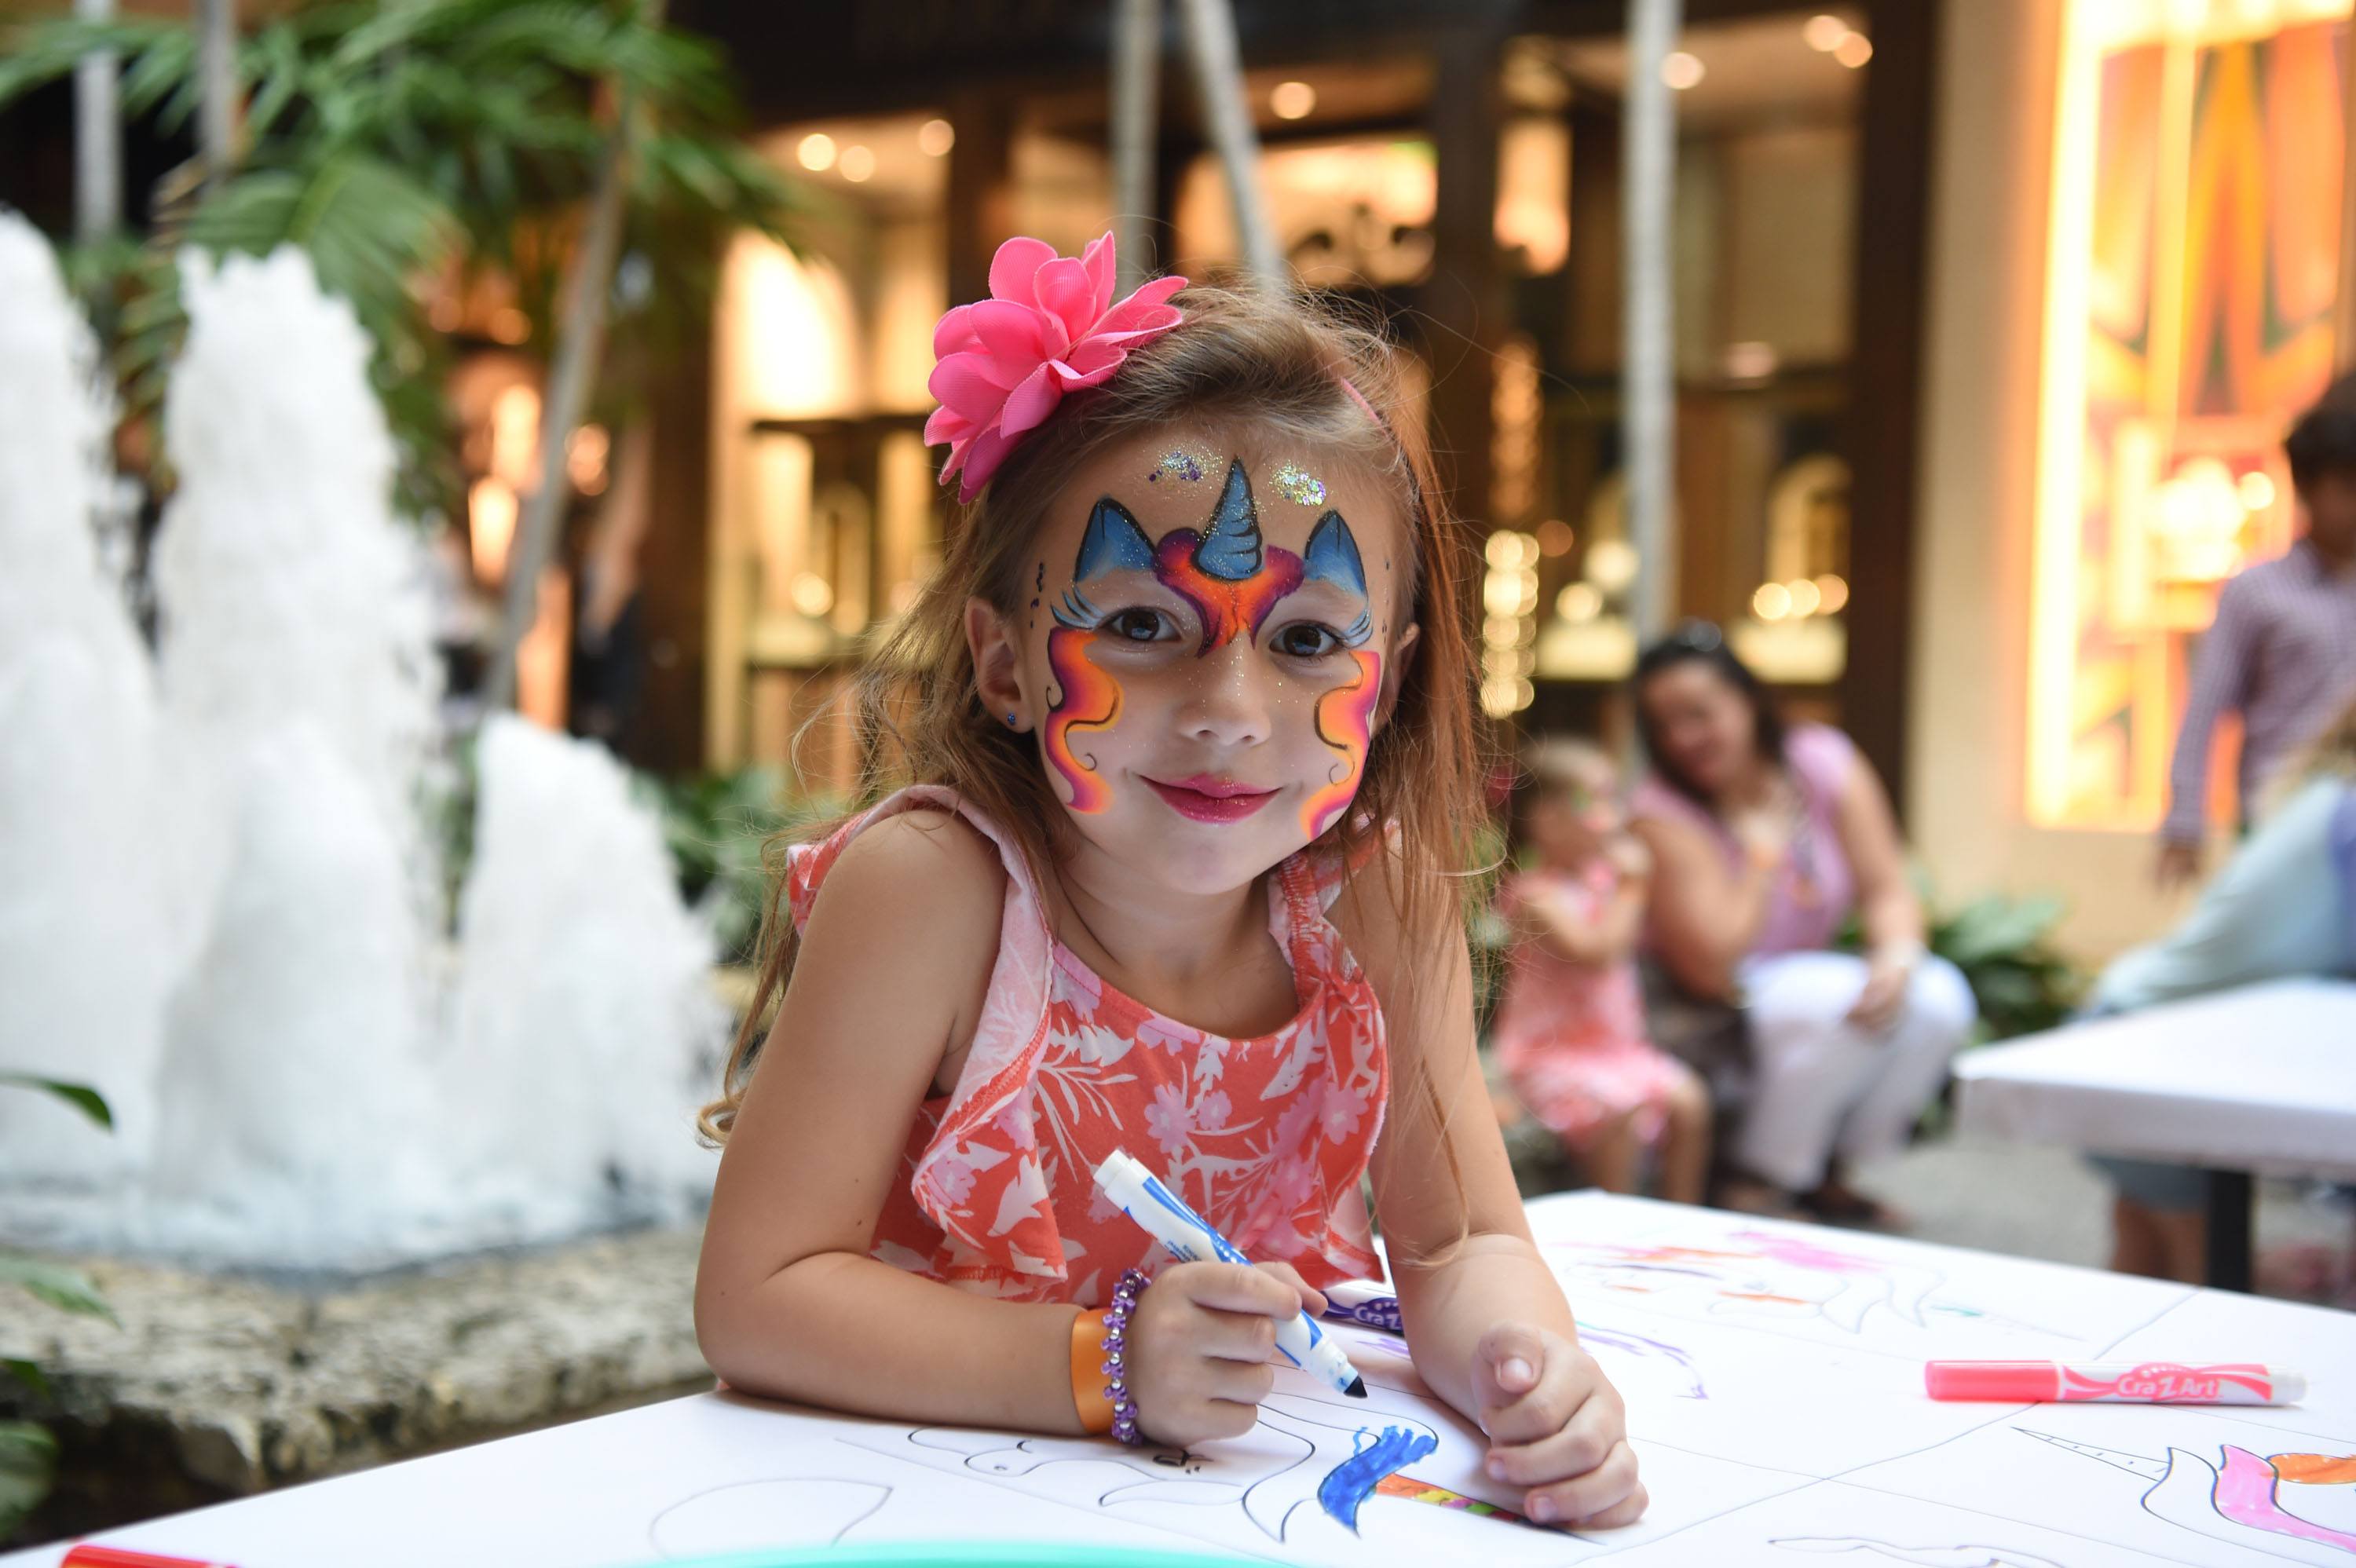 Activations were placed throughout the Shops for children of all ages, from face painting to drawing on graffiti tables and a fun station set up by Neiman Marcus